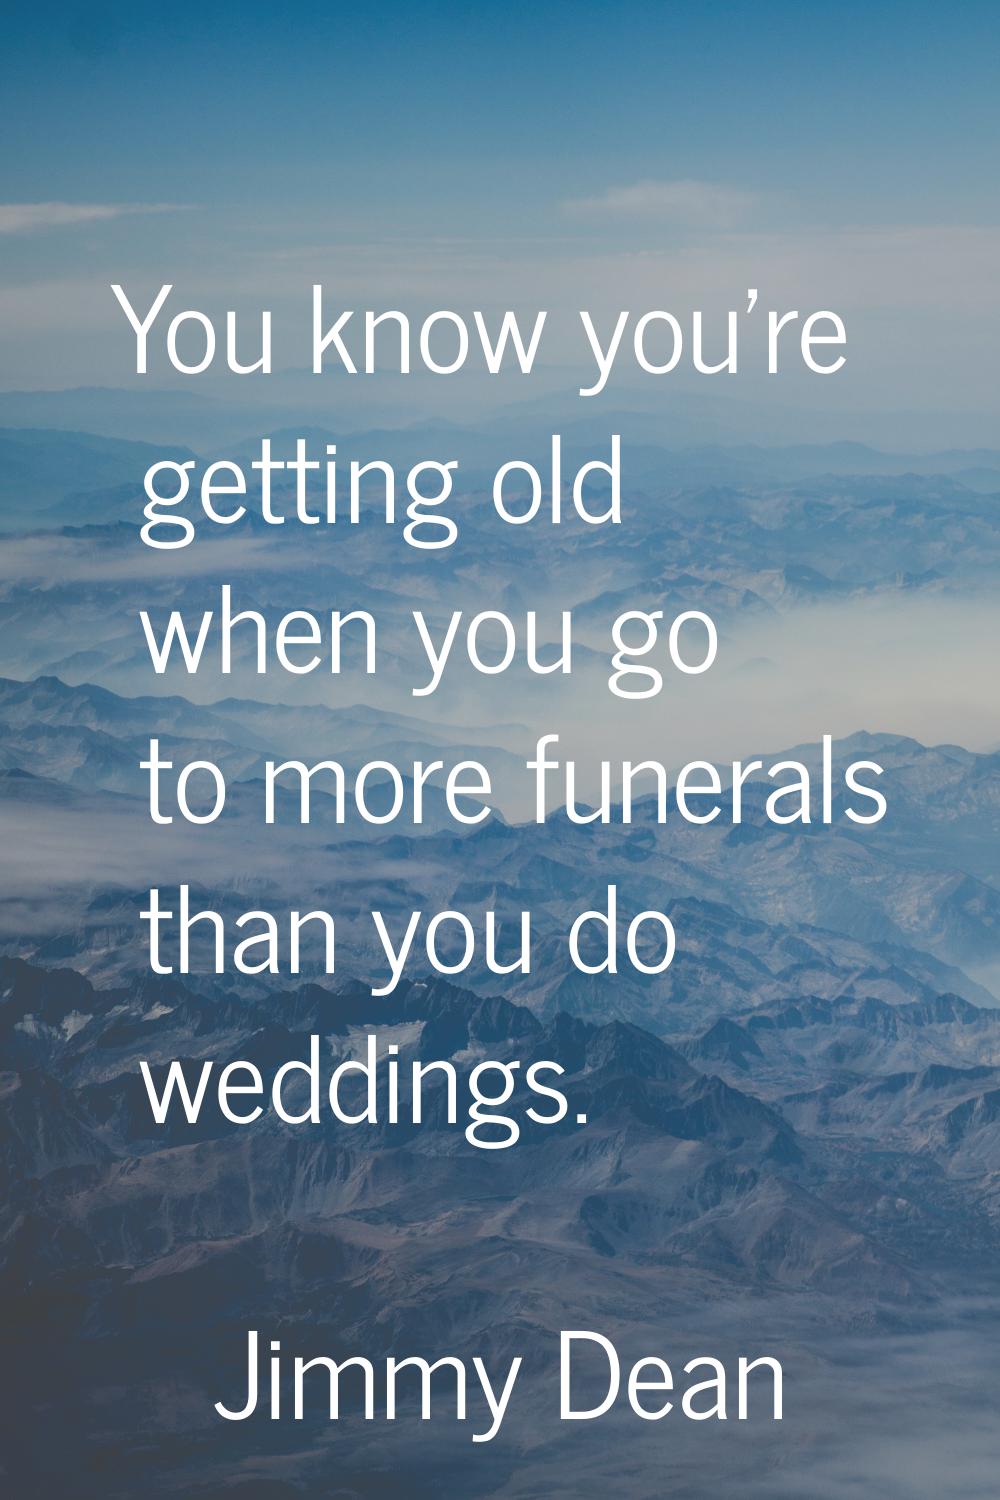 You know you're getting old when you go to more funerals than you do weddings.